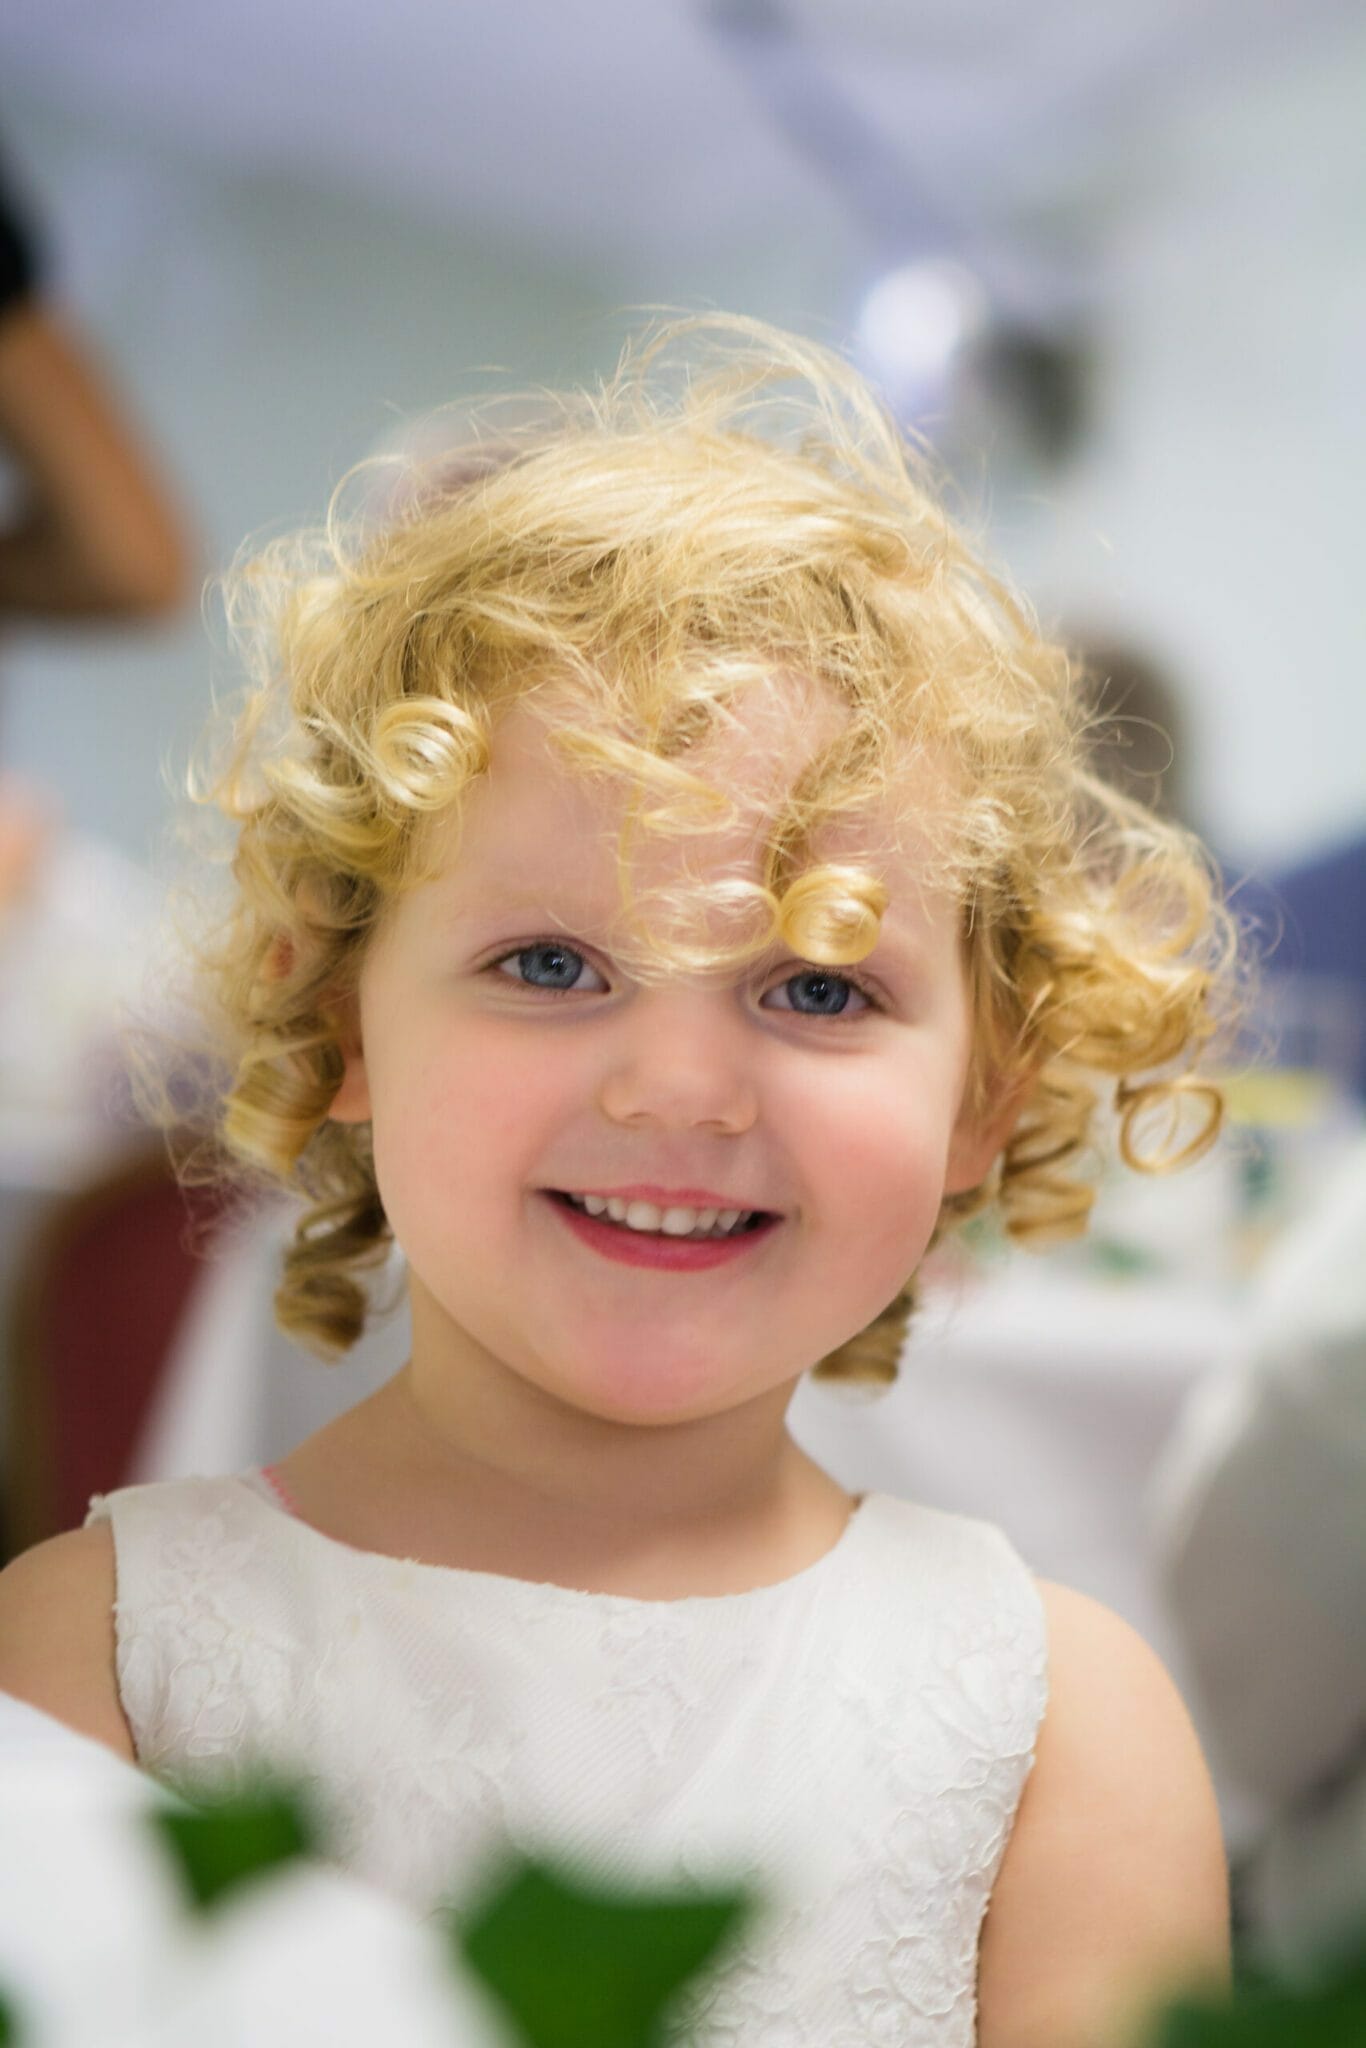 A bridesmaid at a wedding reception taken by Somerset Photographer, Victoria Welton